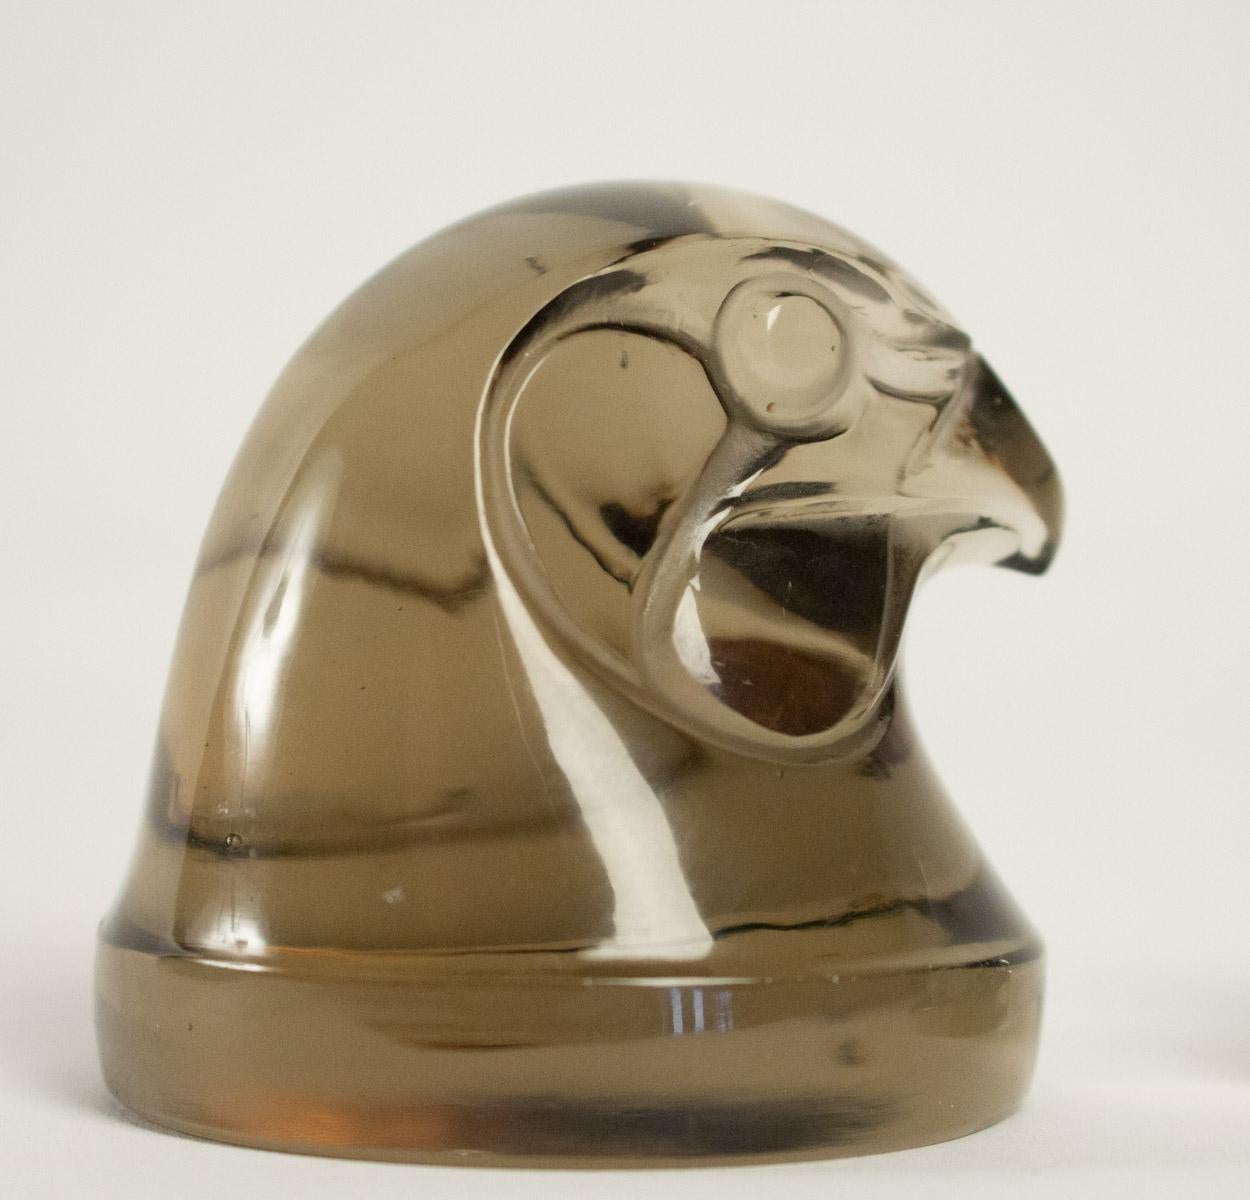 Lalique hawks head mascot in topaz (brown)glass, proper molded signature (R.Lalique France) Model No. 1139, circa 1928 
Sparrow-hawk head mascot signed Lalique France in relief, with two tails on letter Q, in 
model introduced 1928 (discontinued